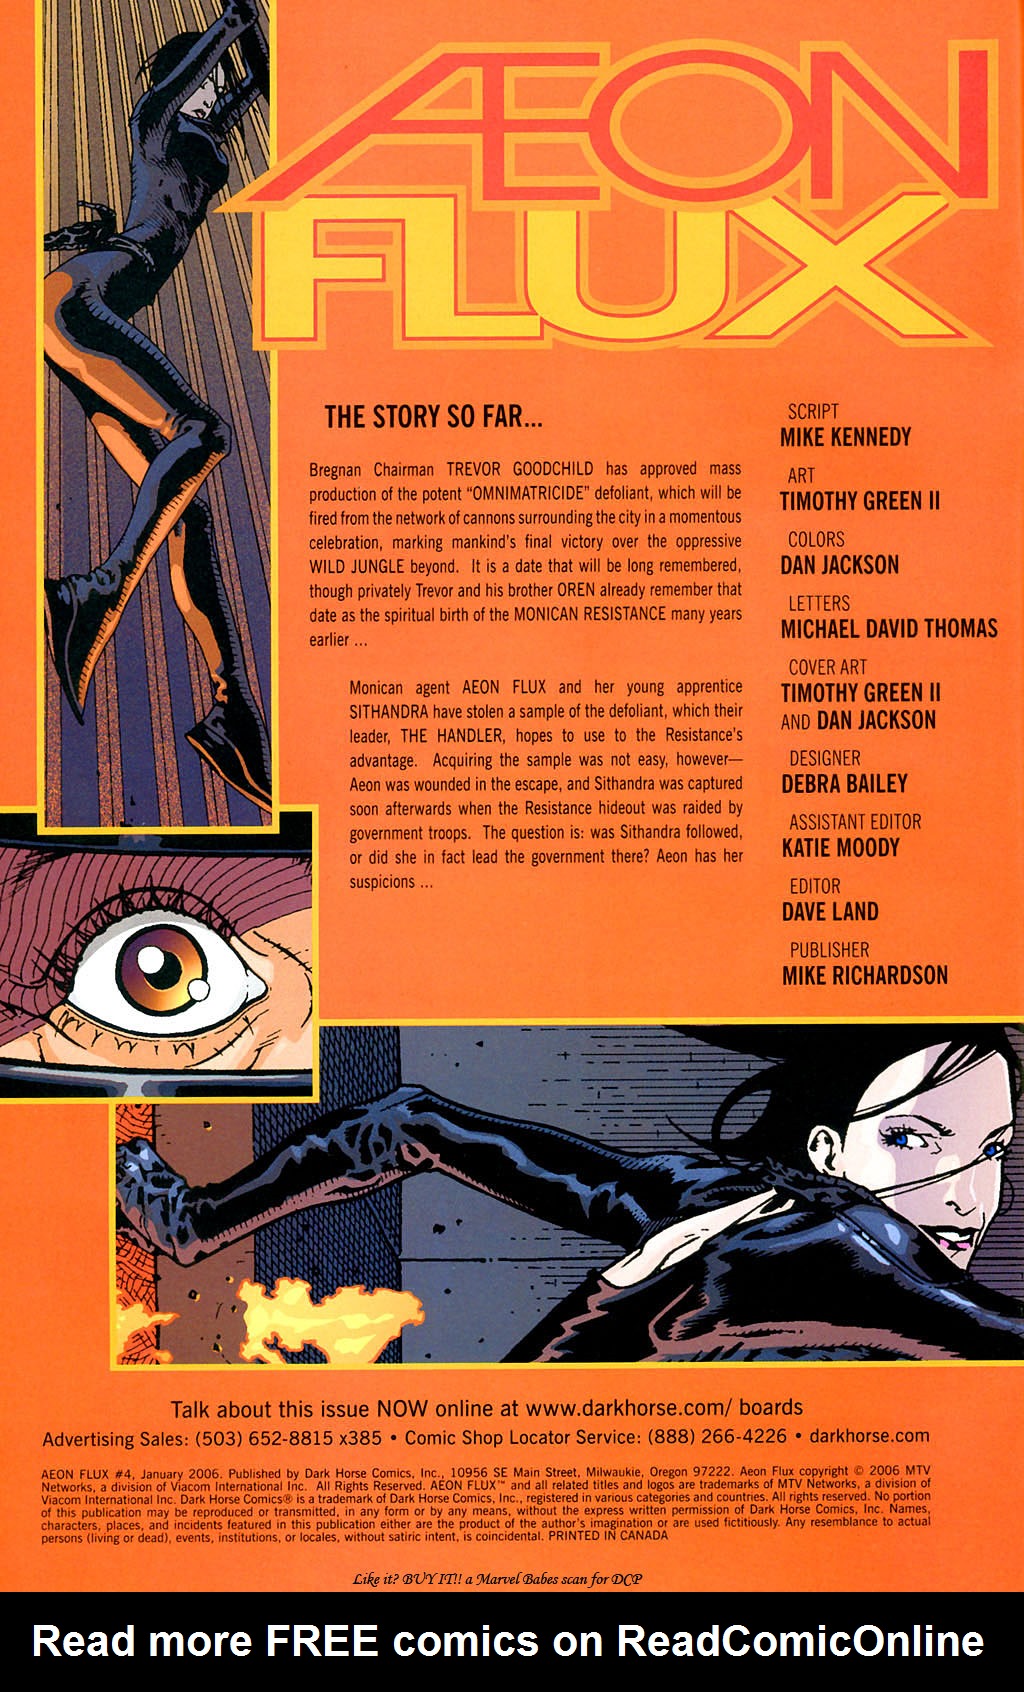 Aeon Flux Xxx Toons - Aeon Flux Issue 4 | Read Aeon Flux Issue 4 comic online in high quality.  Read Full Comic online for free - Read comics online in high quality .